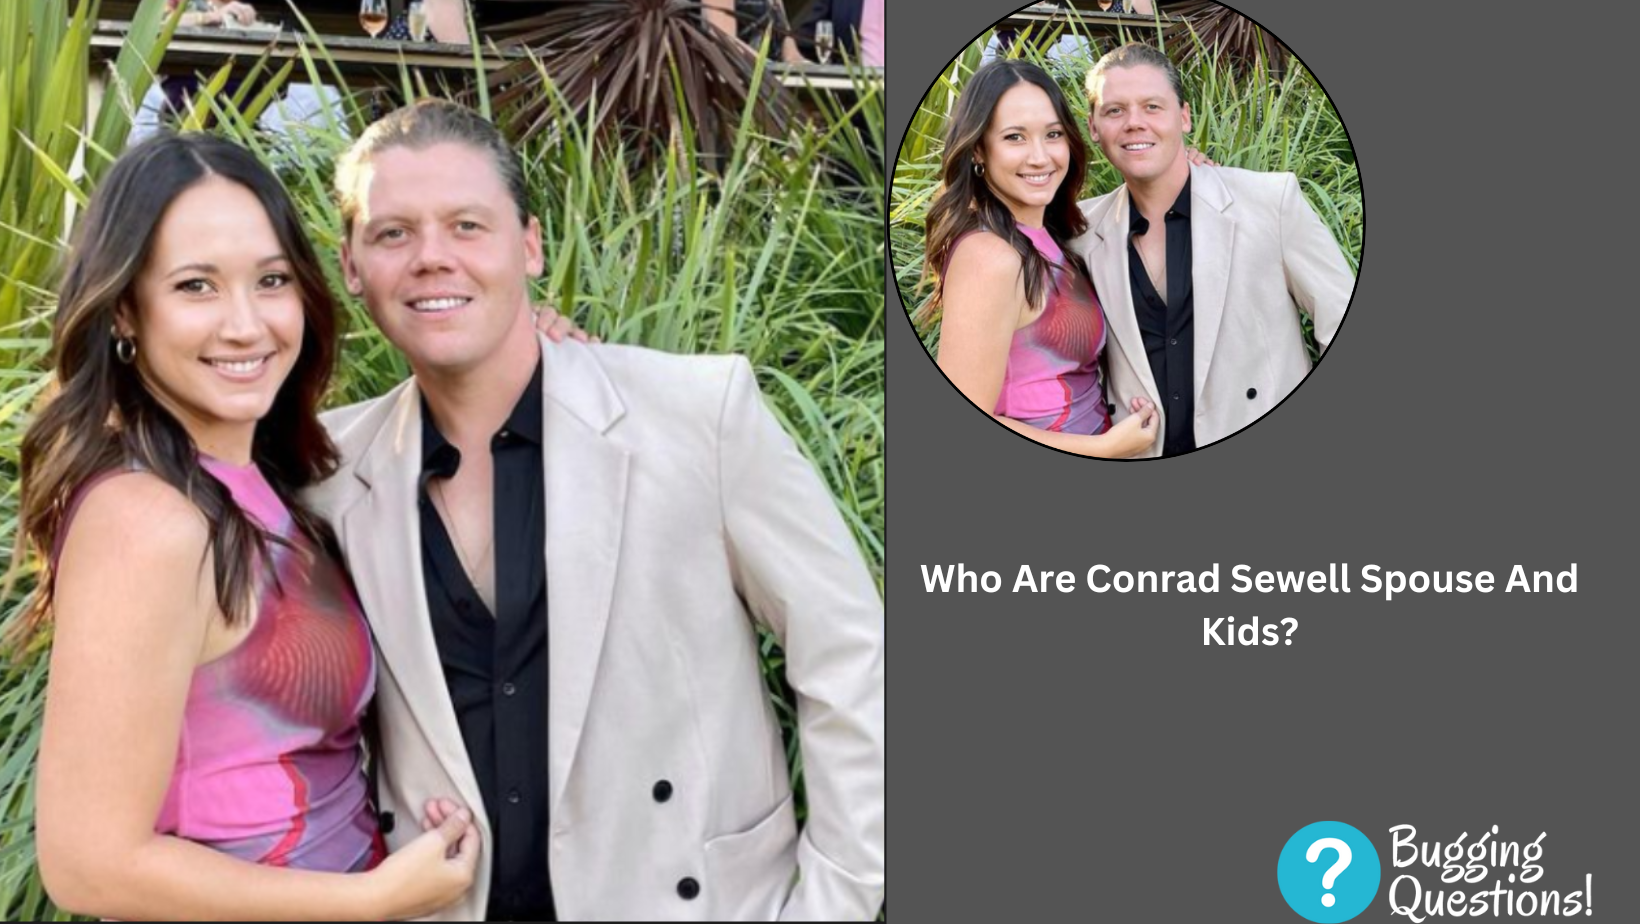 Who Are Conrad Sewell Spouse And Kids?